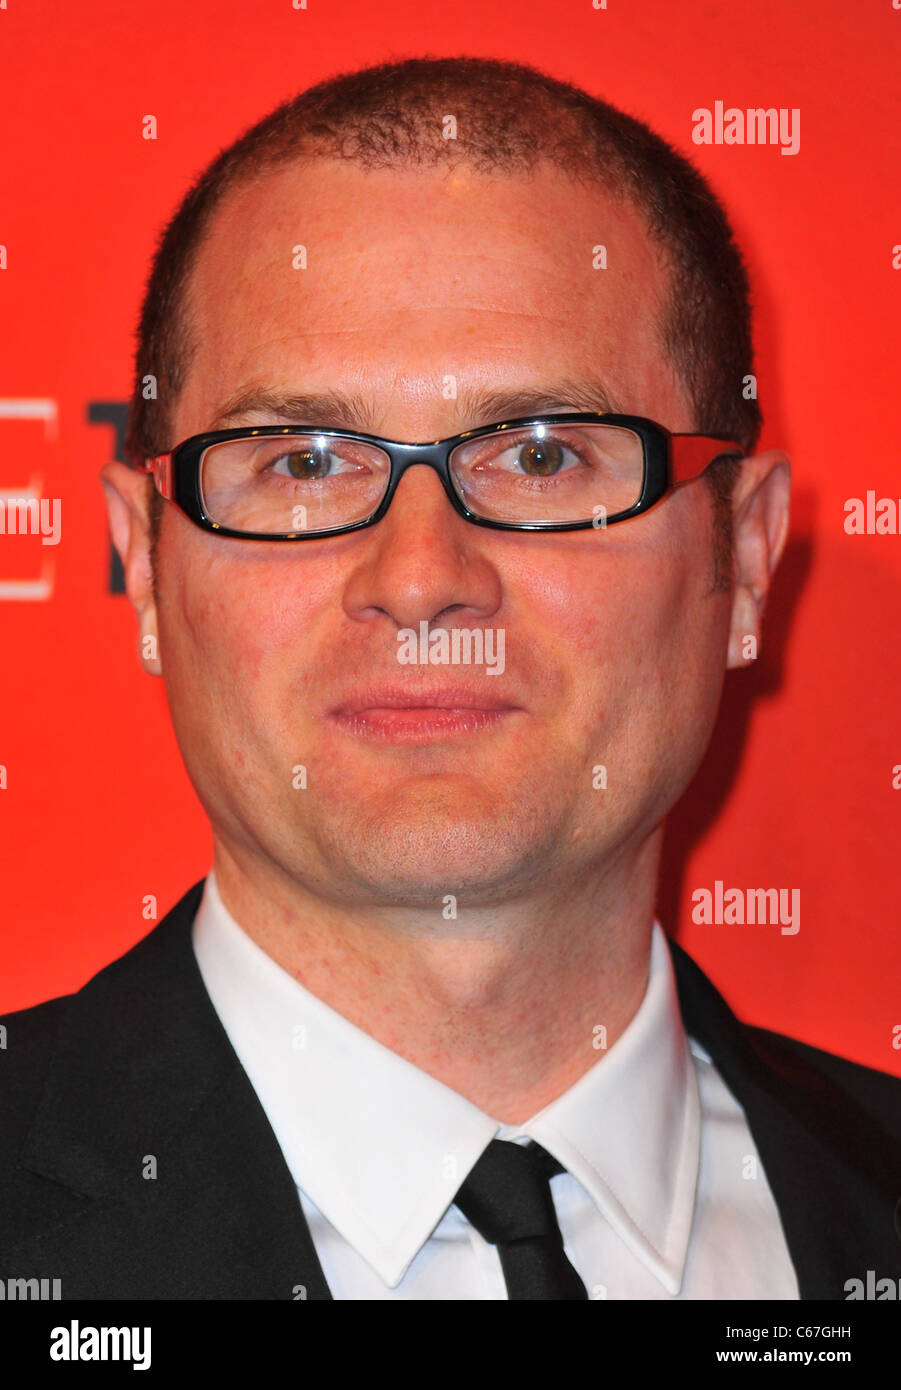 Rob Bell at arrivals for TIME 100 GALA, Frederick P. Rose Hall - Jazz at Lincoln Center, New York, NY April 26, 2011. Photo By: Stock Photo